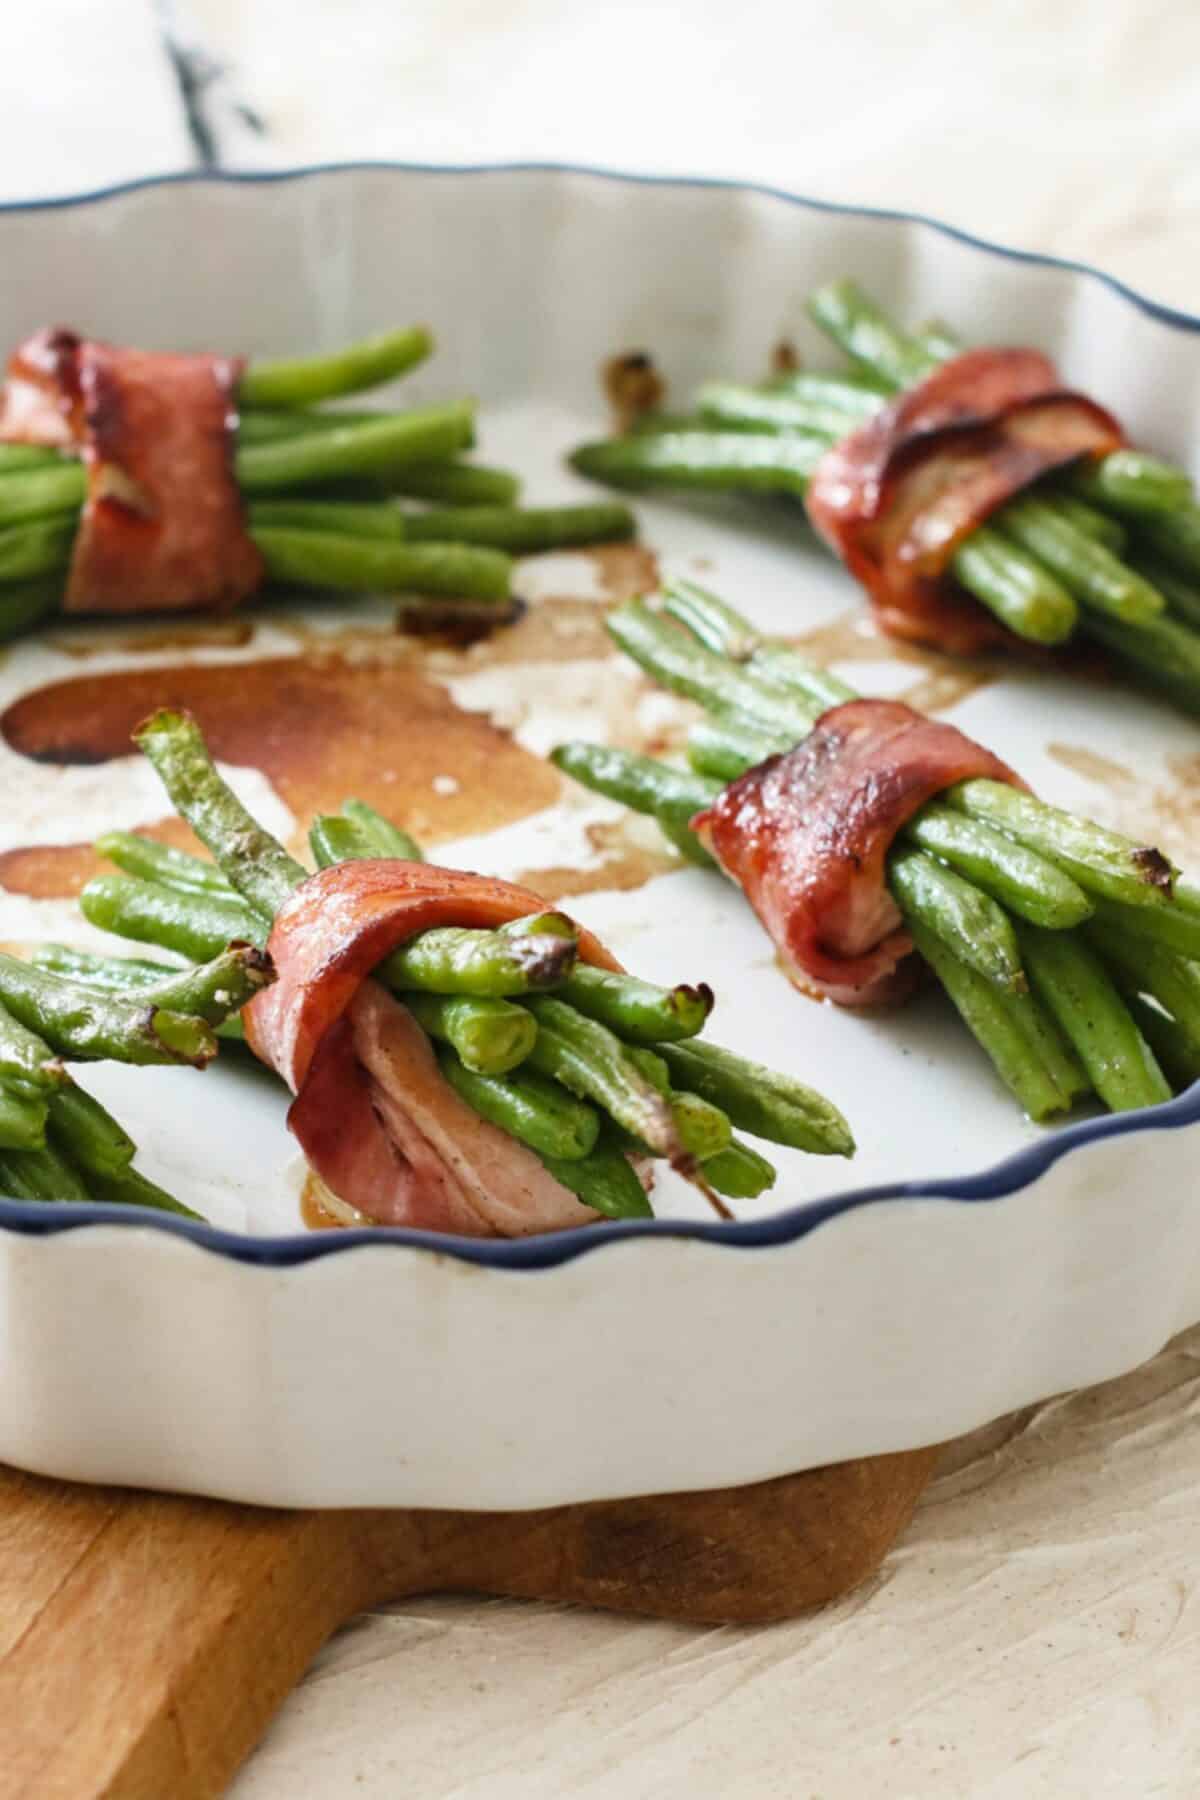 Bacon wrapped green beans baked to perfection in a baking dish